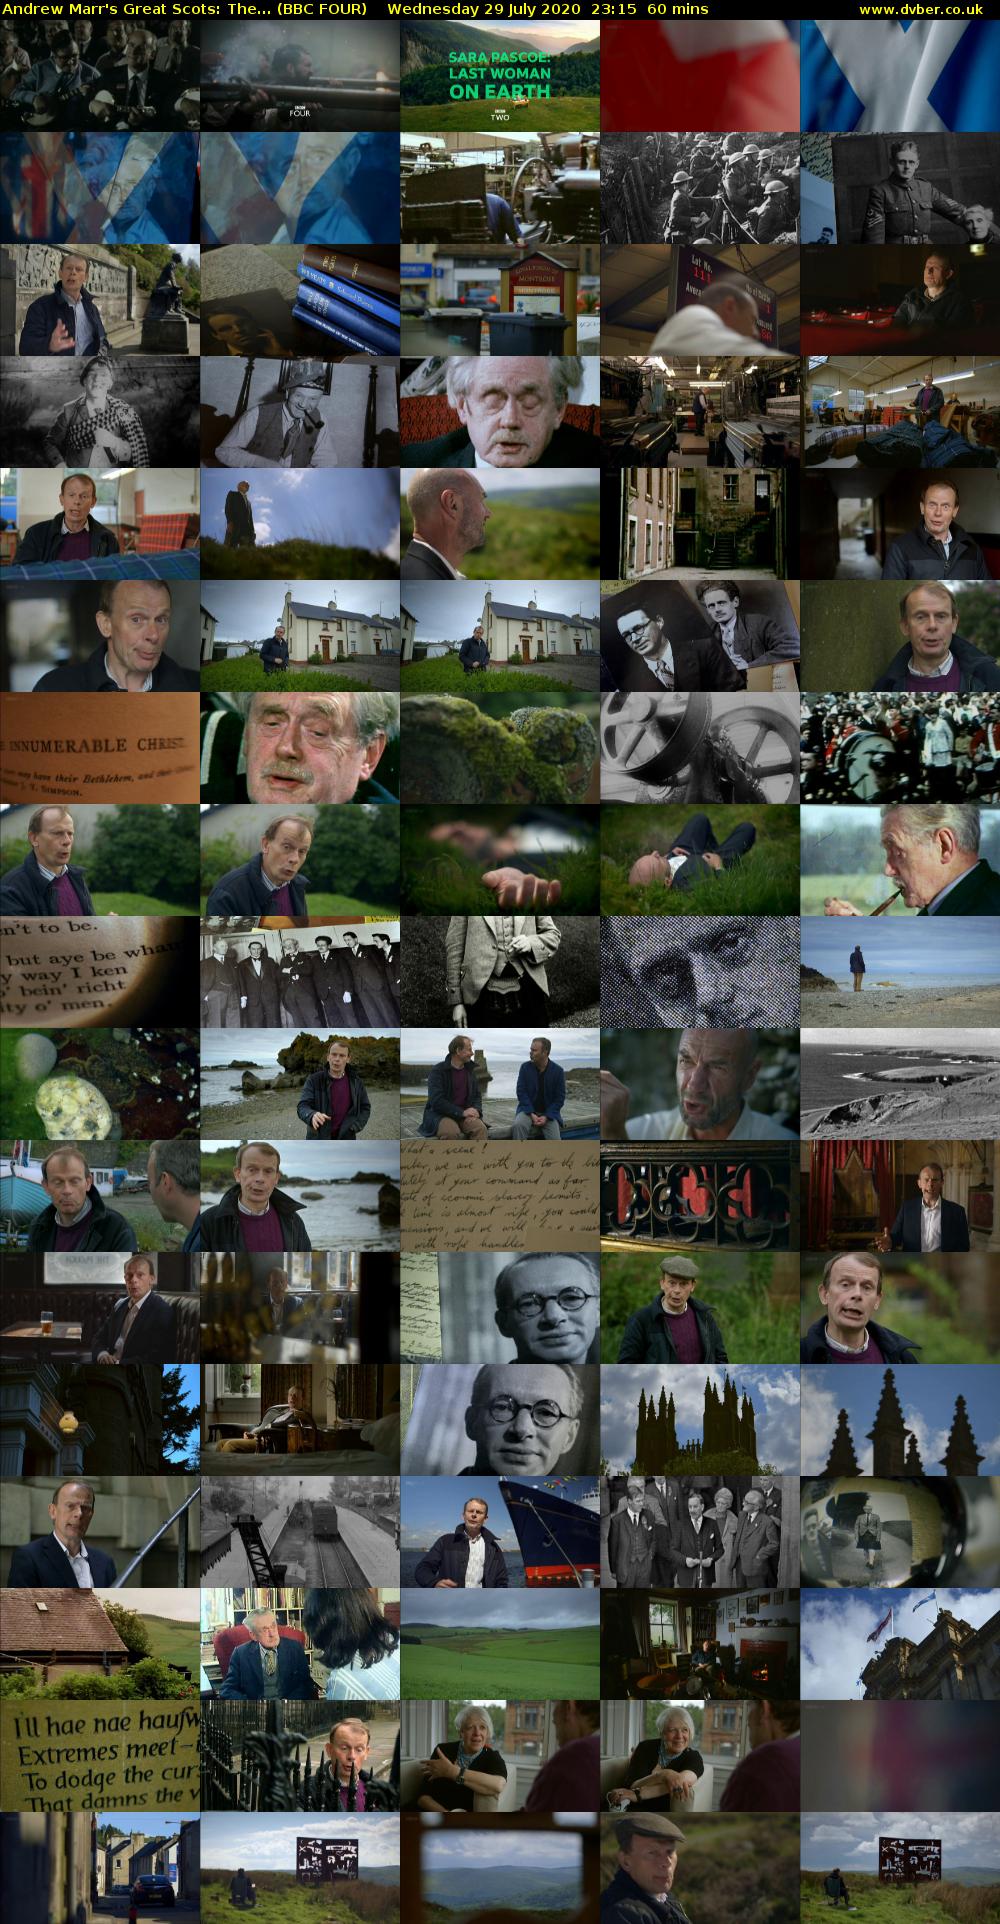 Andrew Marr's Great Scots: The... (BBC FOUR) Wednesday 29 July 2020 23:15 - 00:15